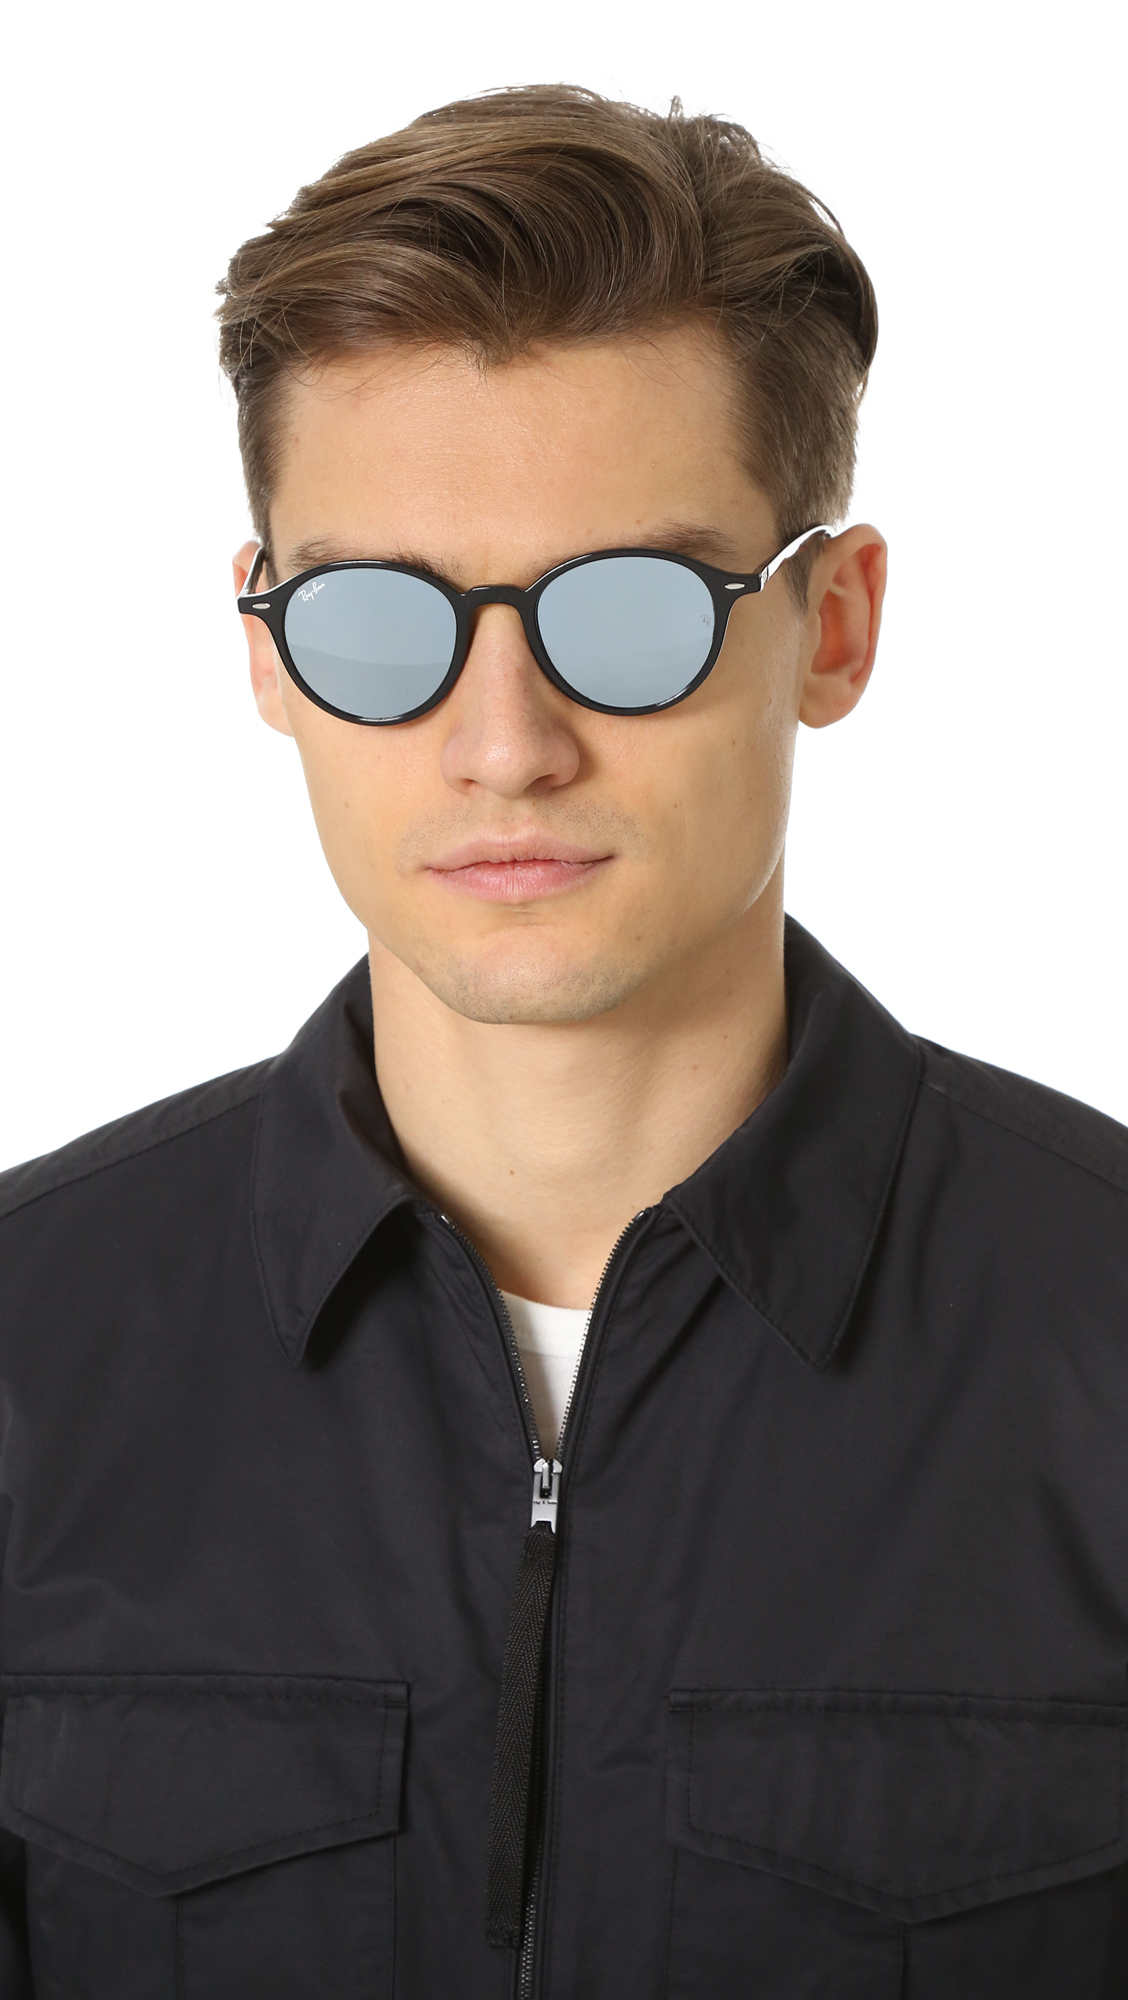 Lyst RayBan Full Fit Round Sunglasses in Black for Men